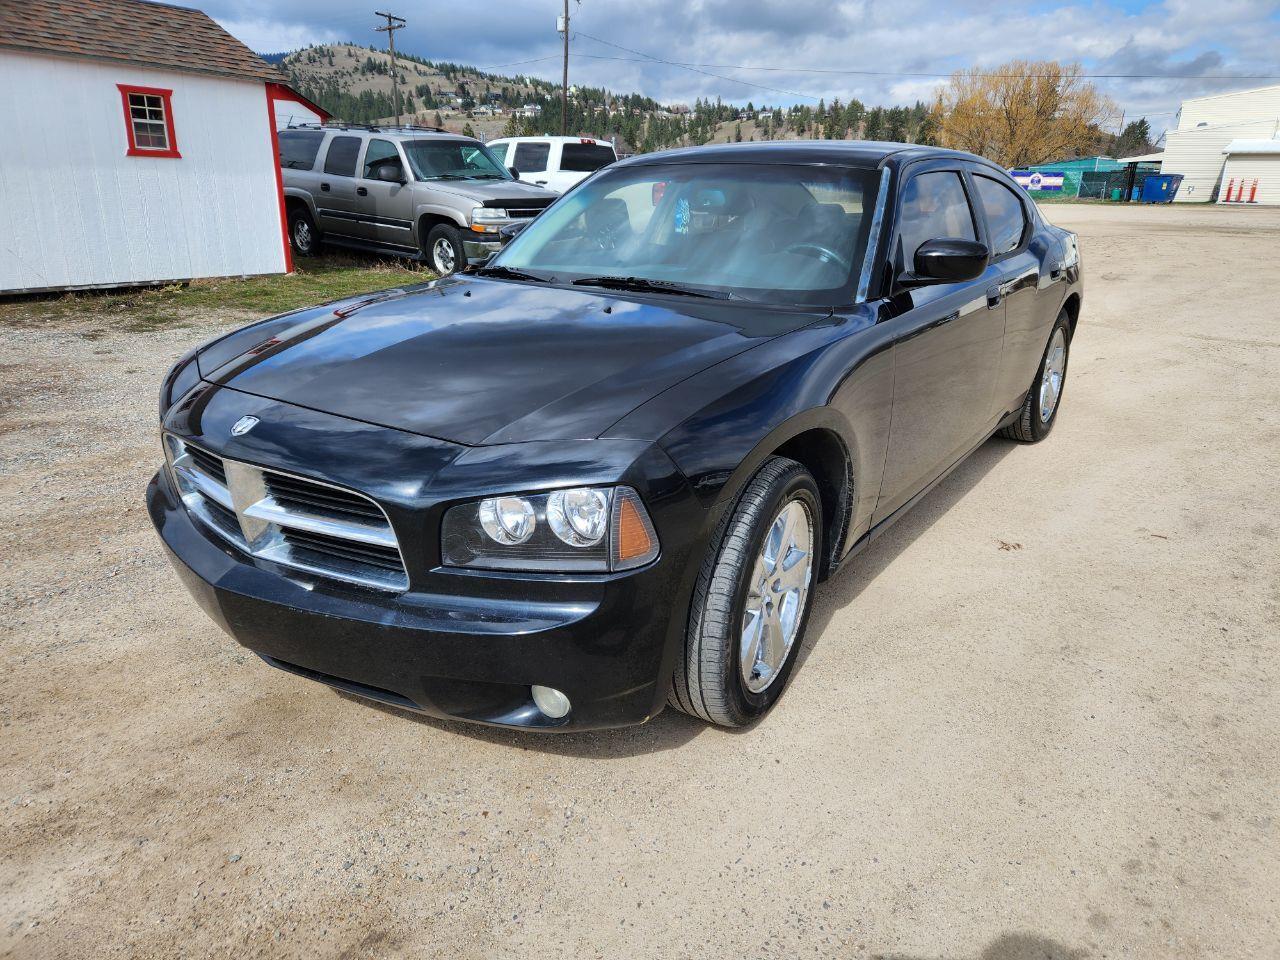 2009 Dodge Charger R/T in Lolo, Montana